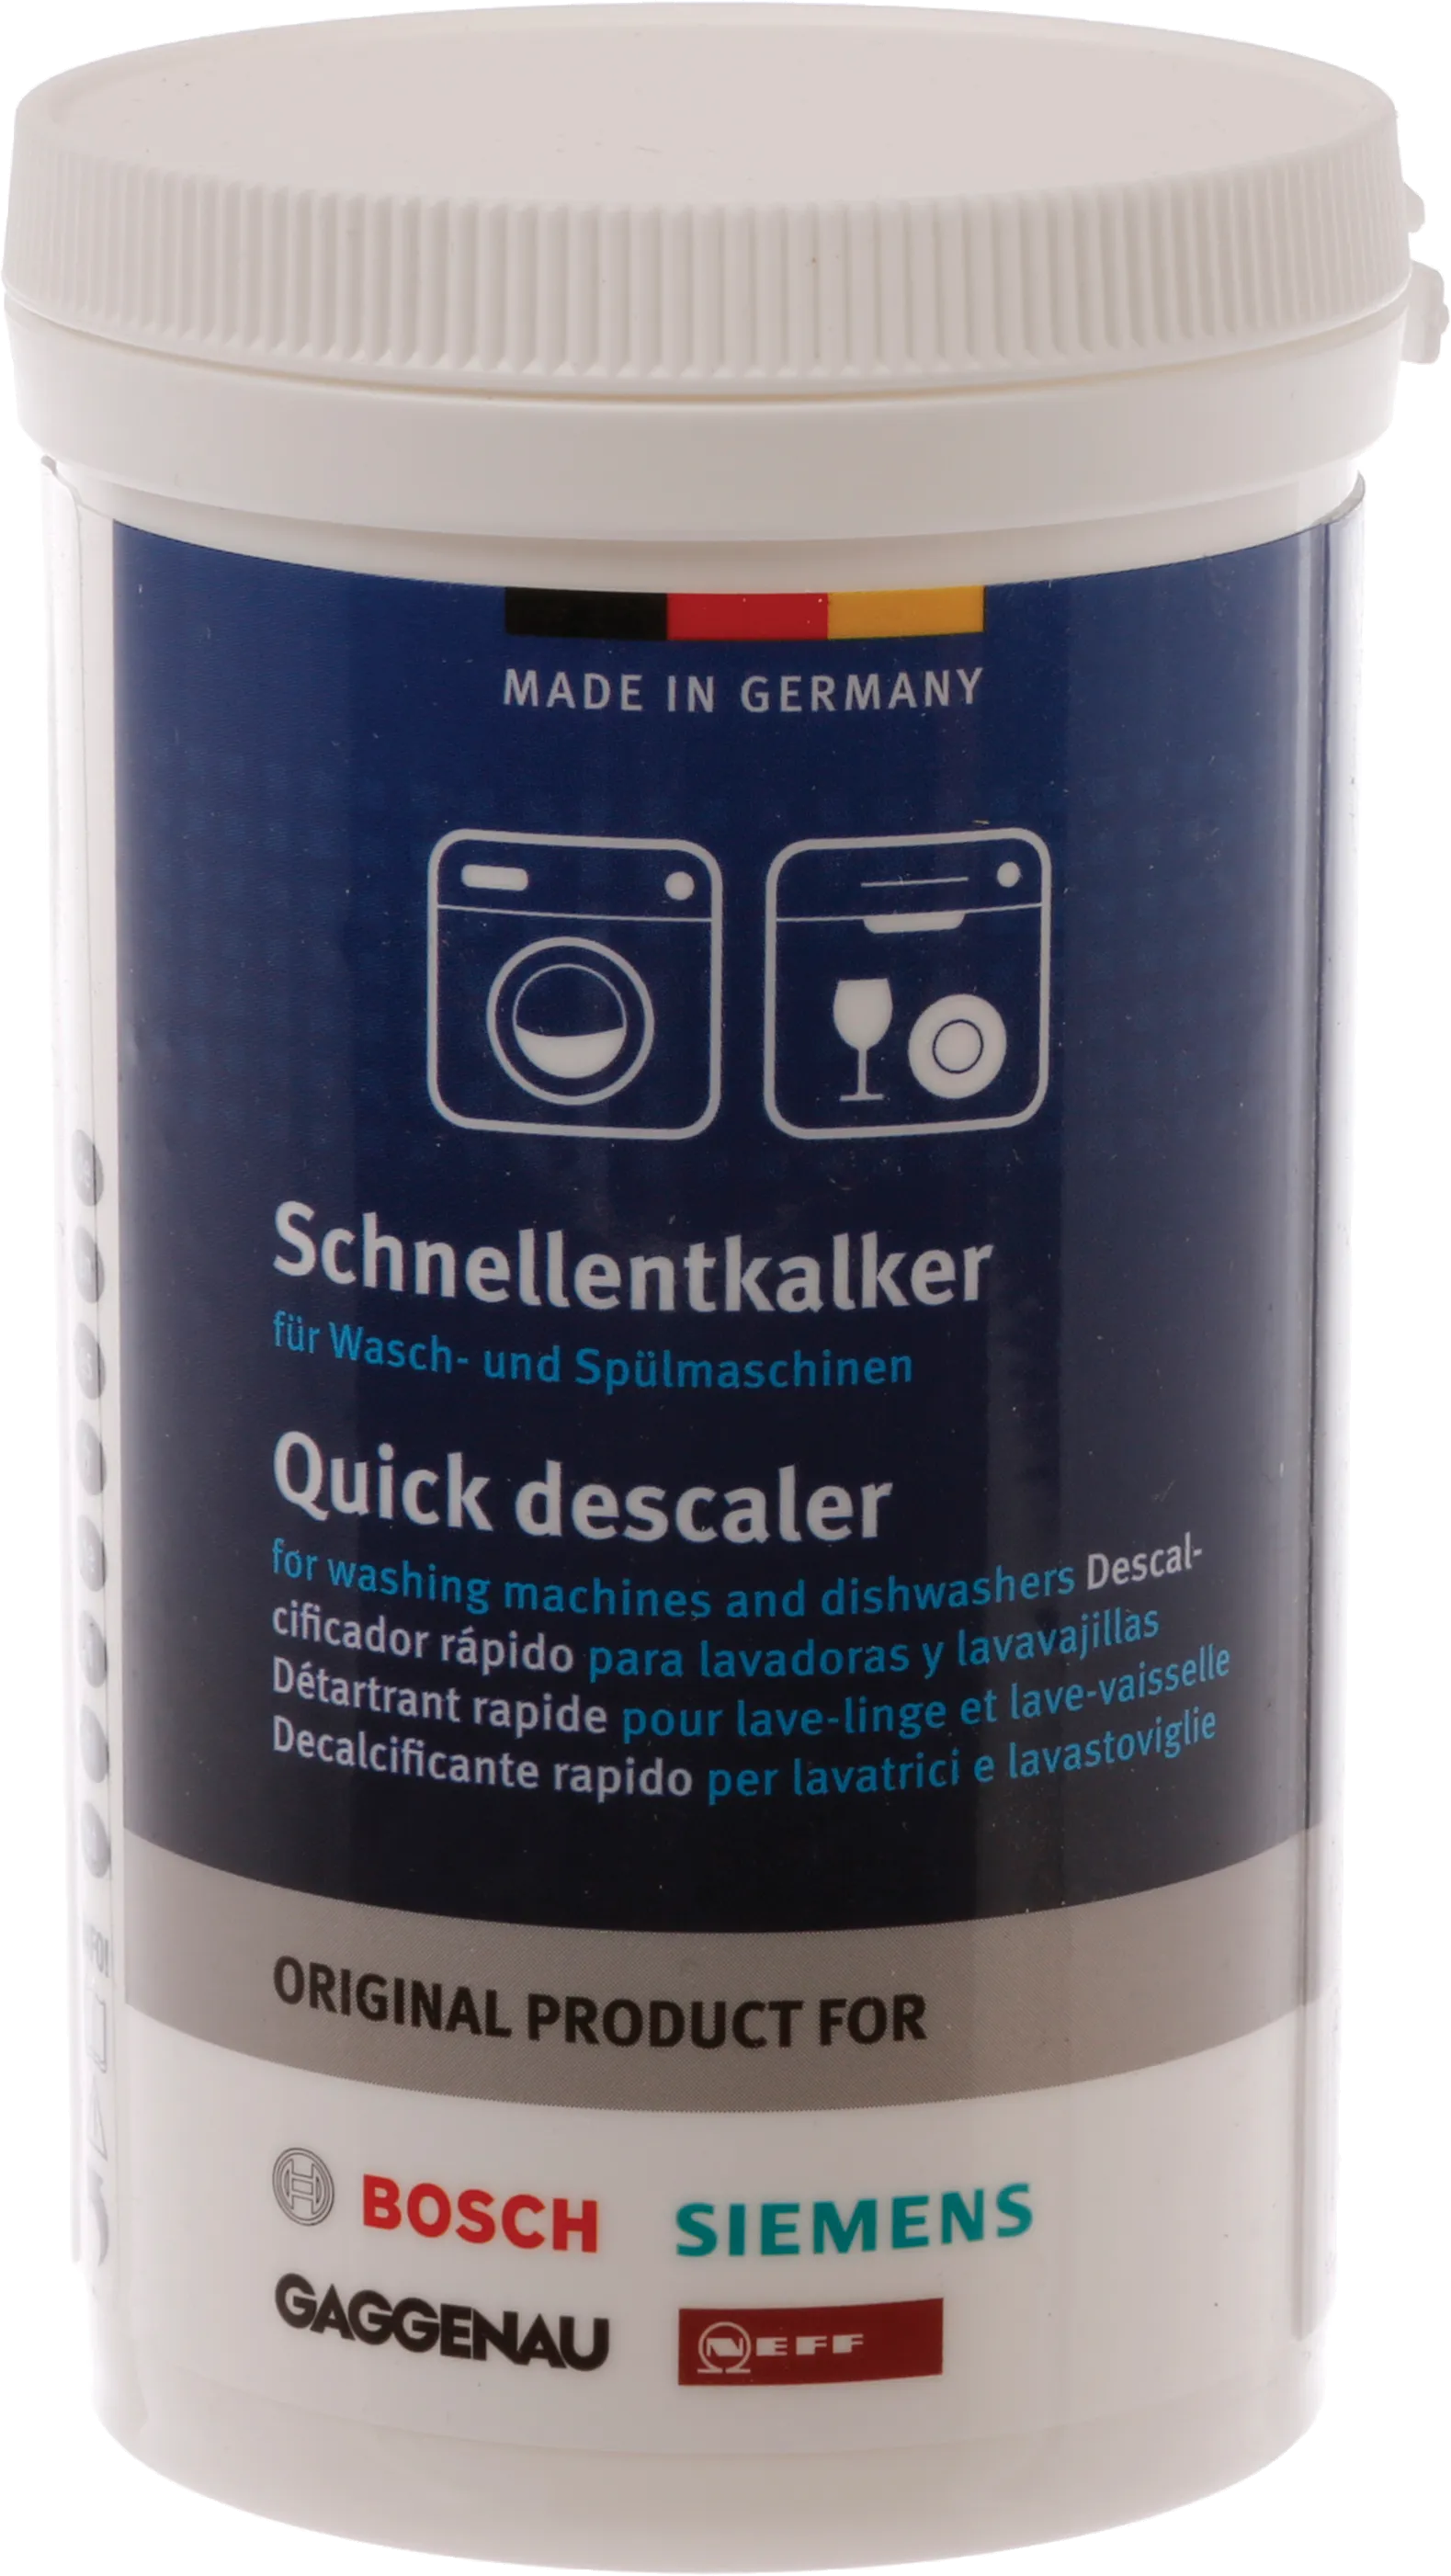 Descaler Quick descaler for washing machines and dishwashers 